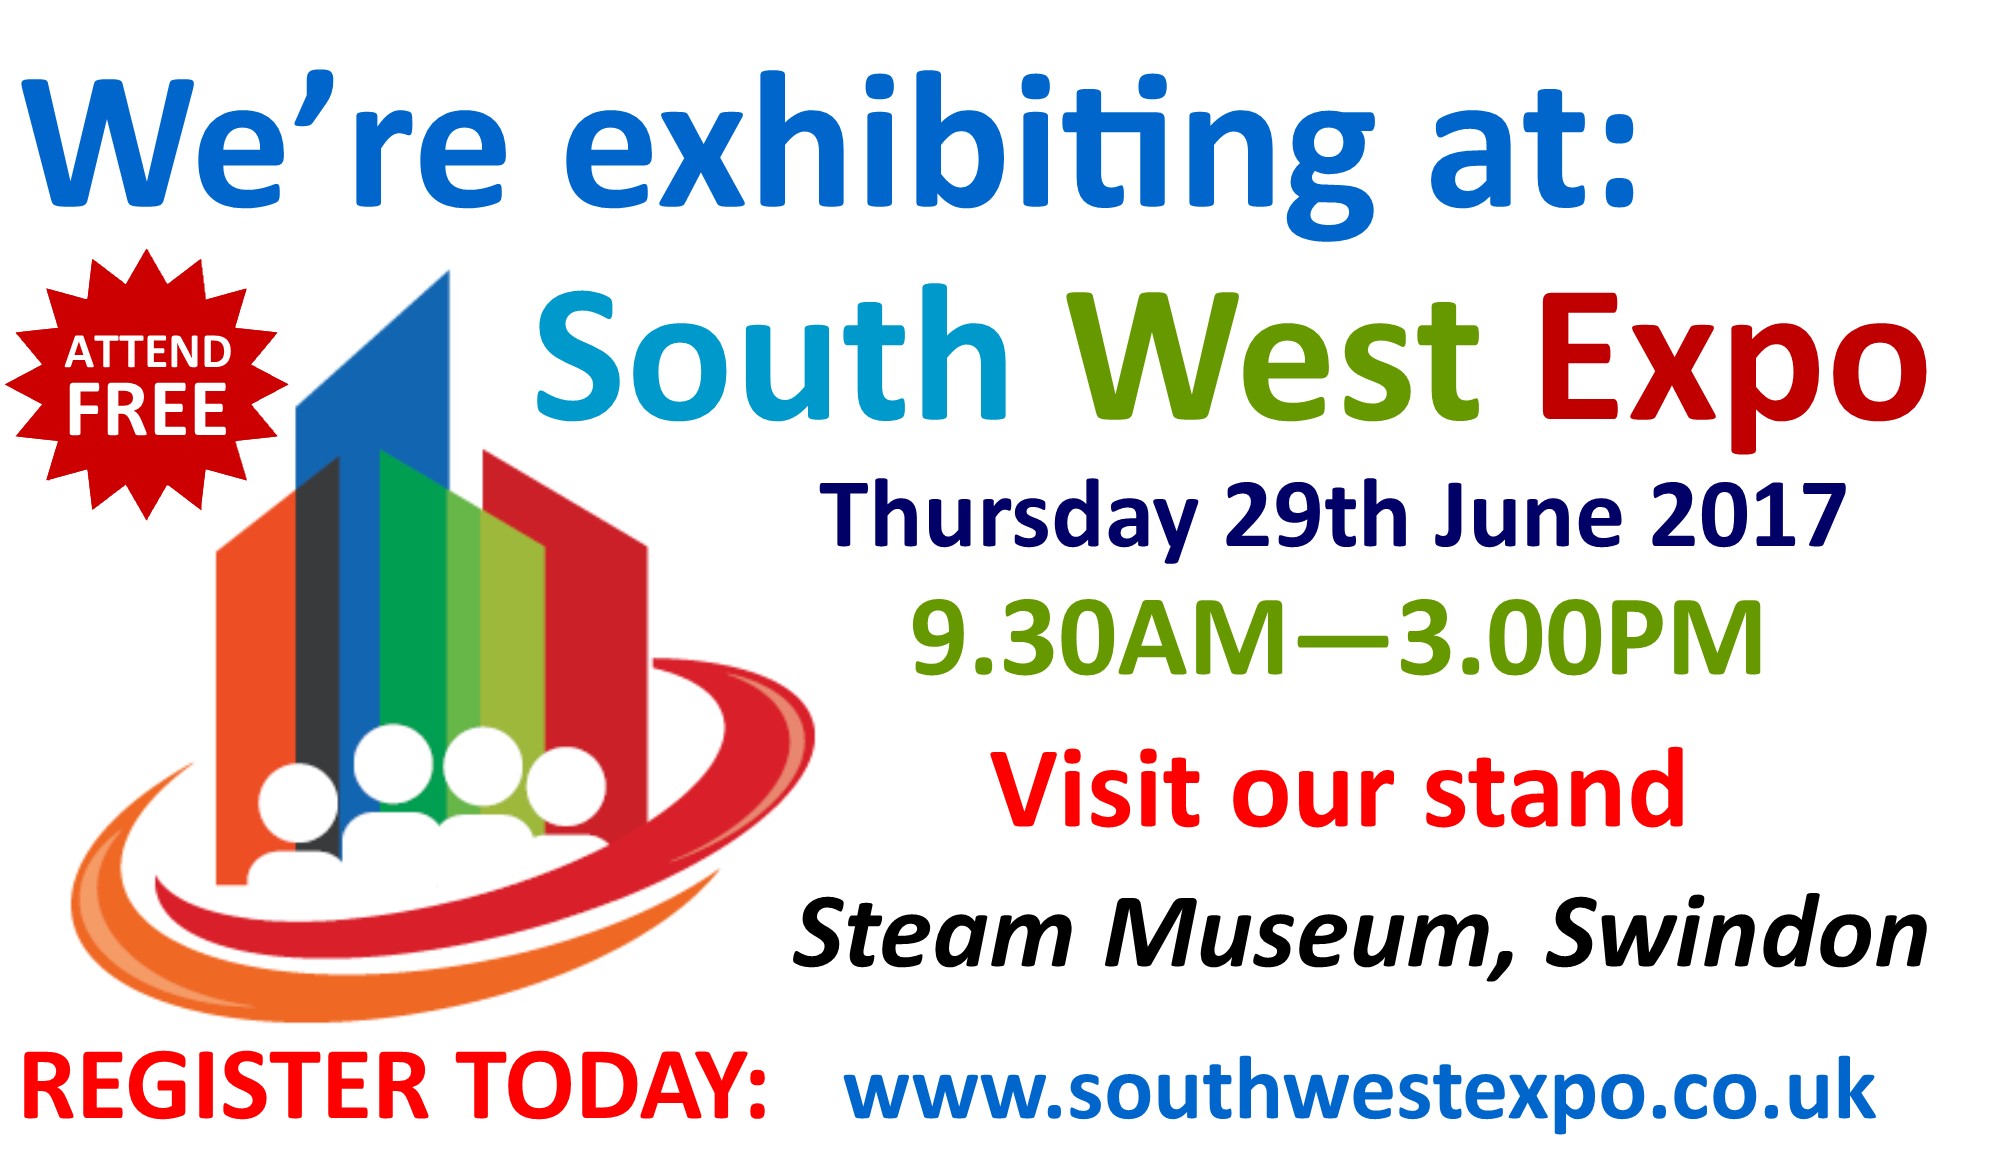 South West Expo